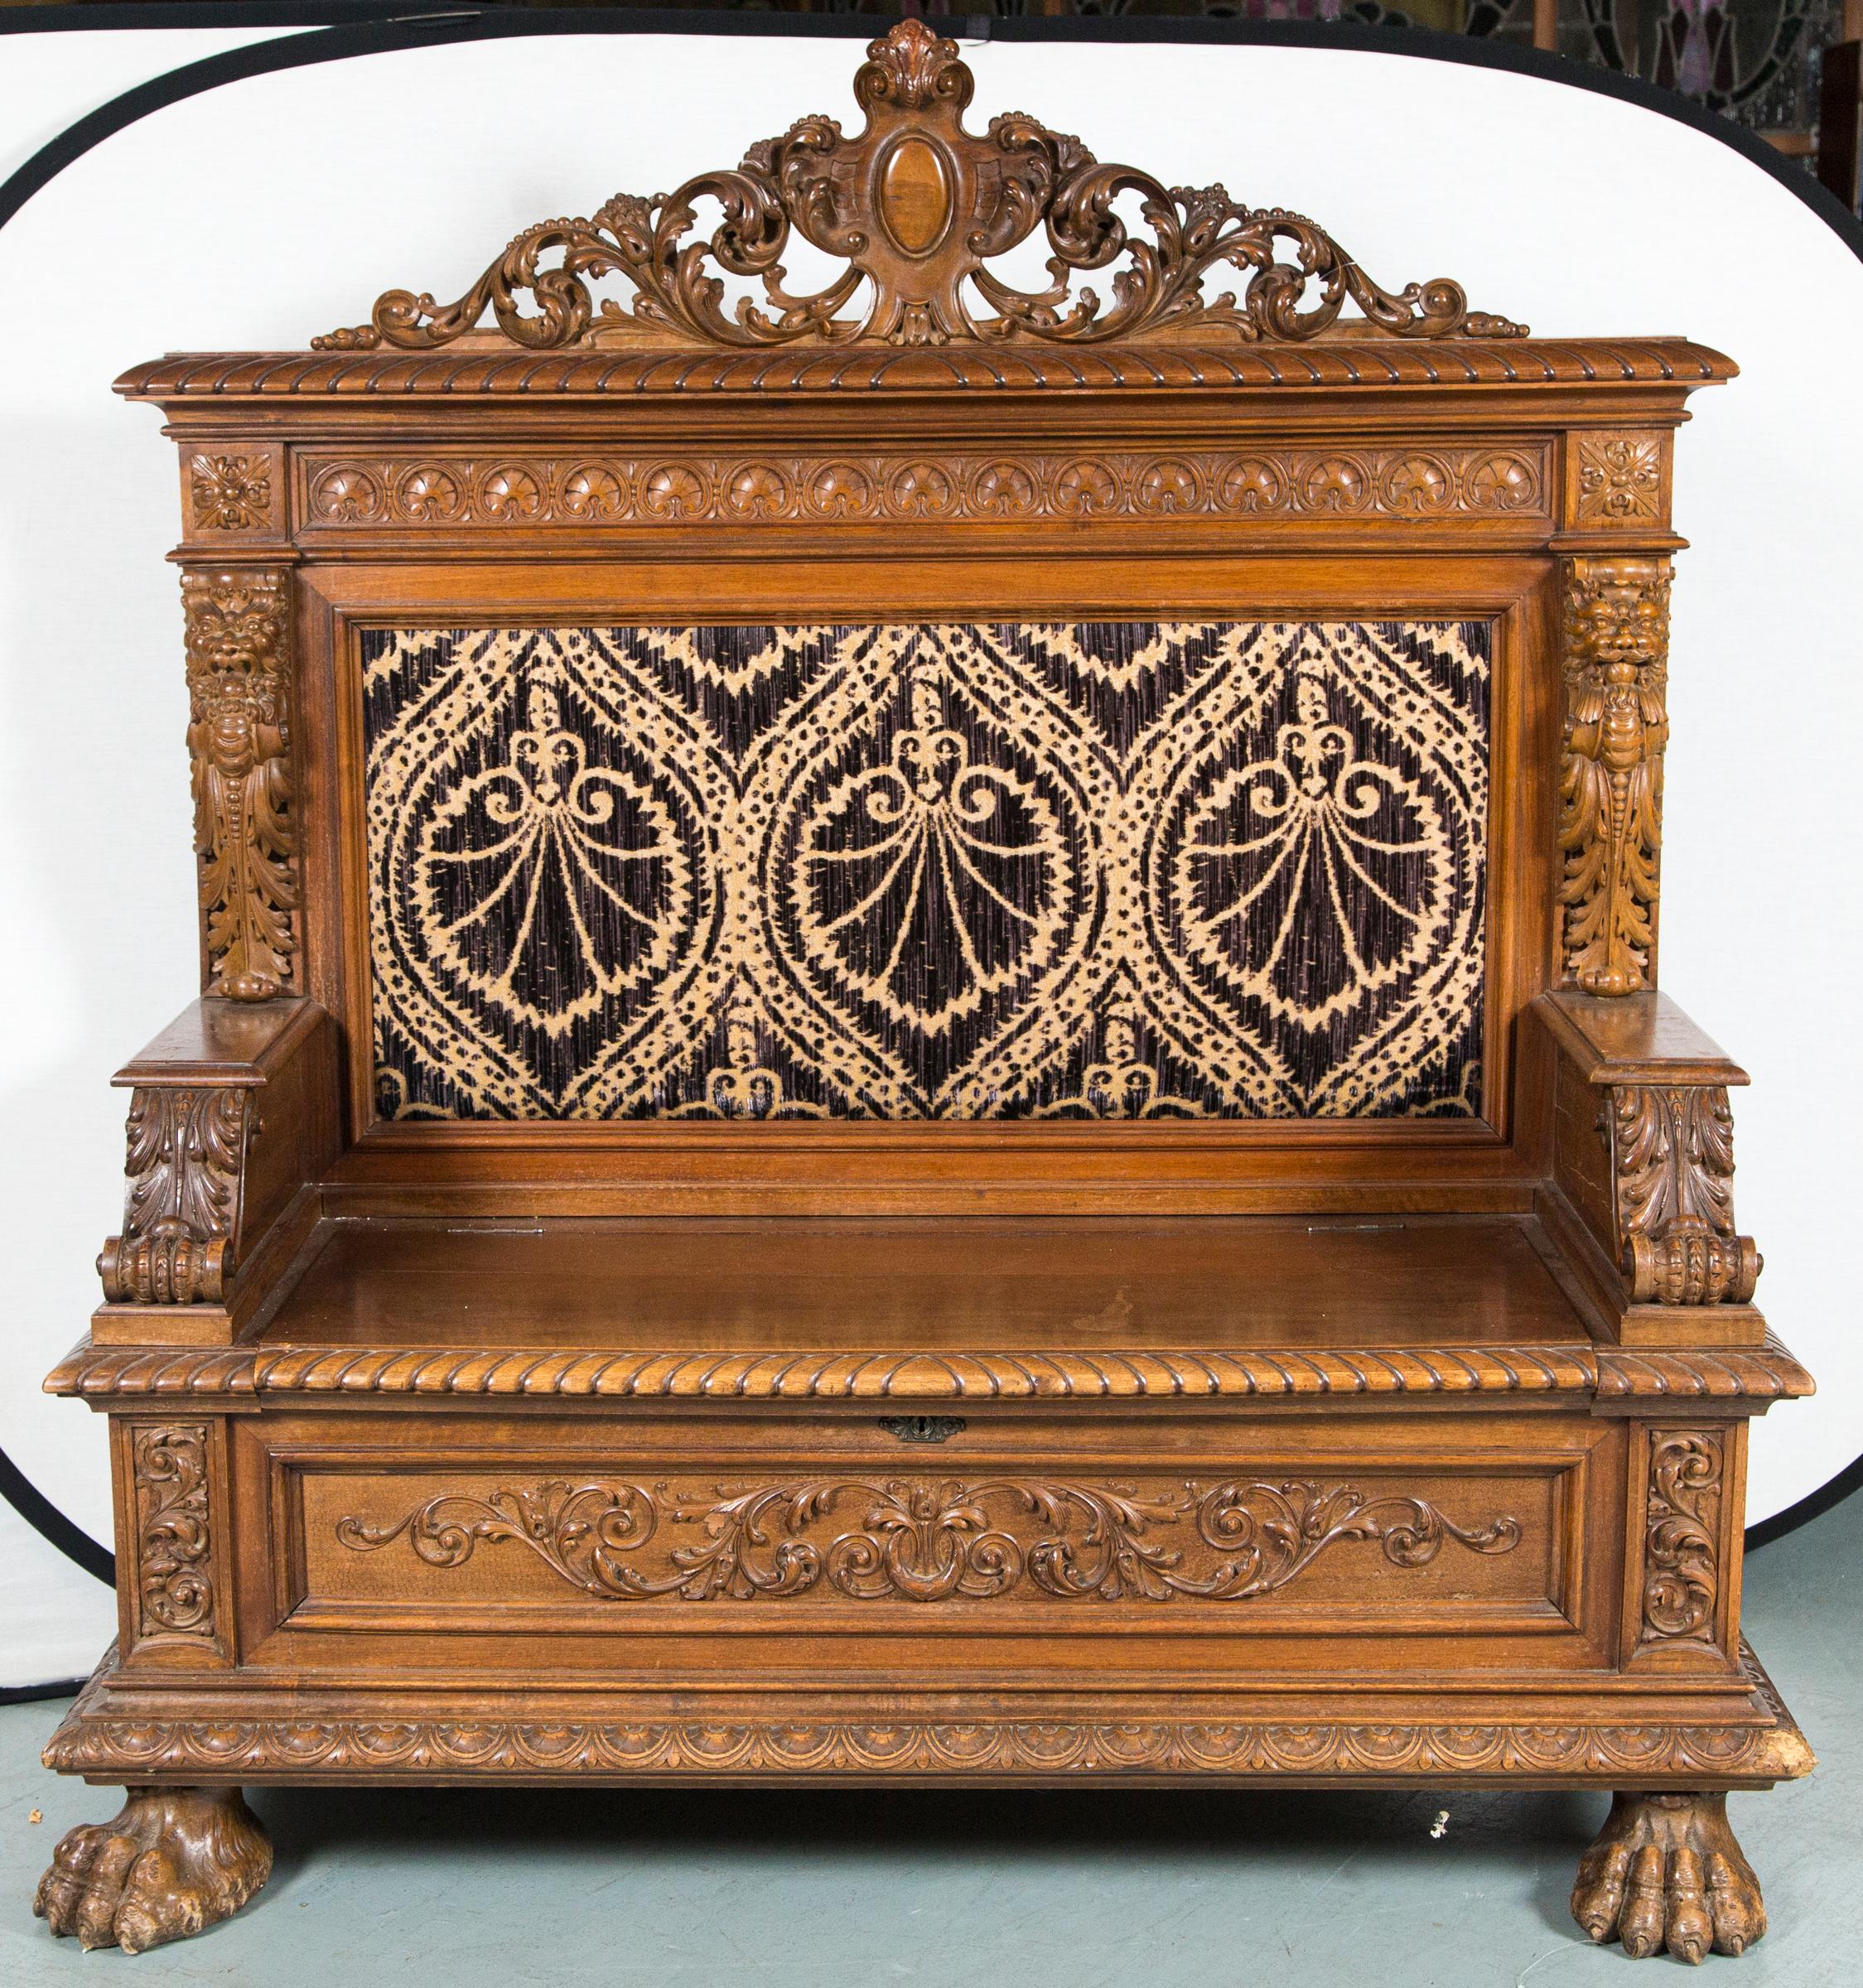 Beautiful walnut carved 19th century bench. Wonderful pierced-carved crest at the top. Carved lions and acanthus leaf designs to each side. Seat lifts for storage. Carved lion paw feet that show some wear. Upholstery shows some wear. Great 19th